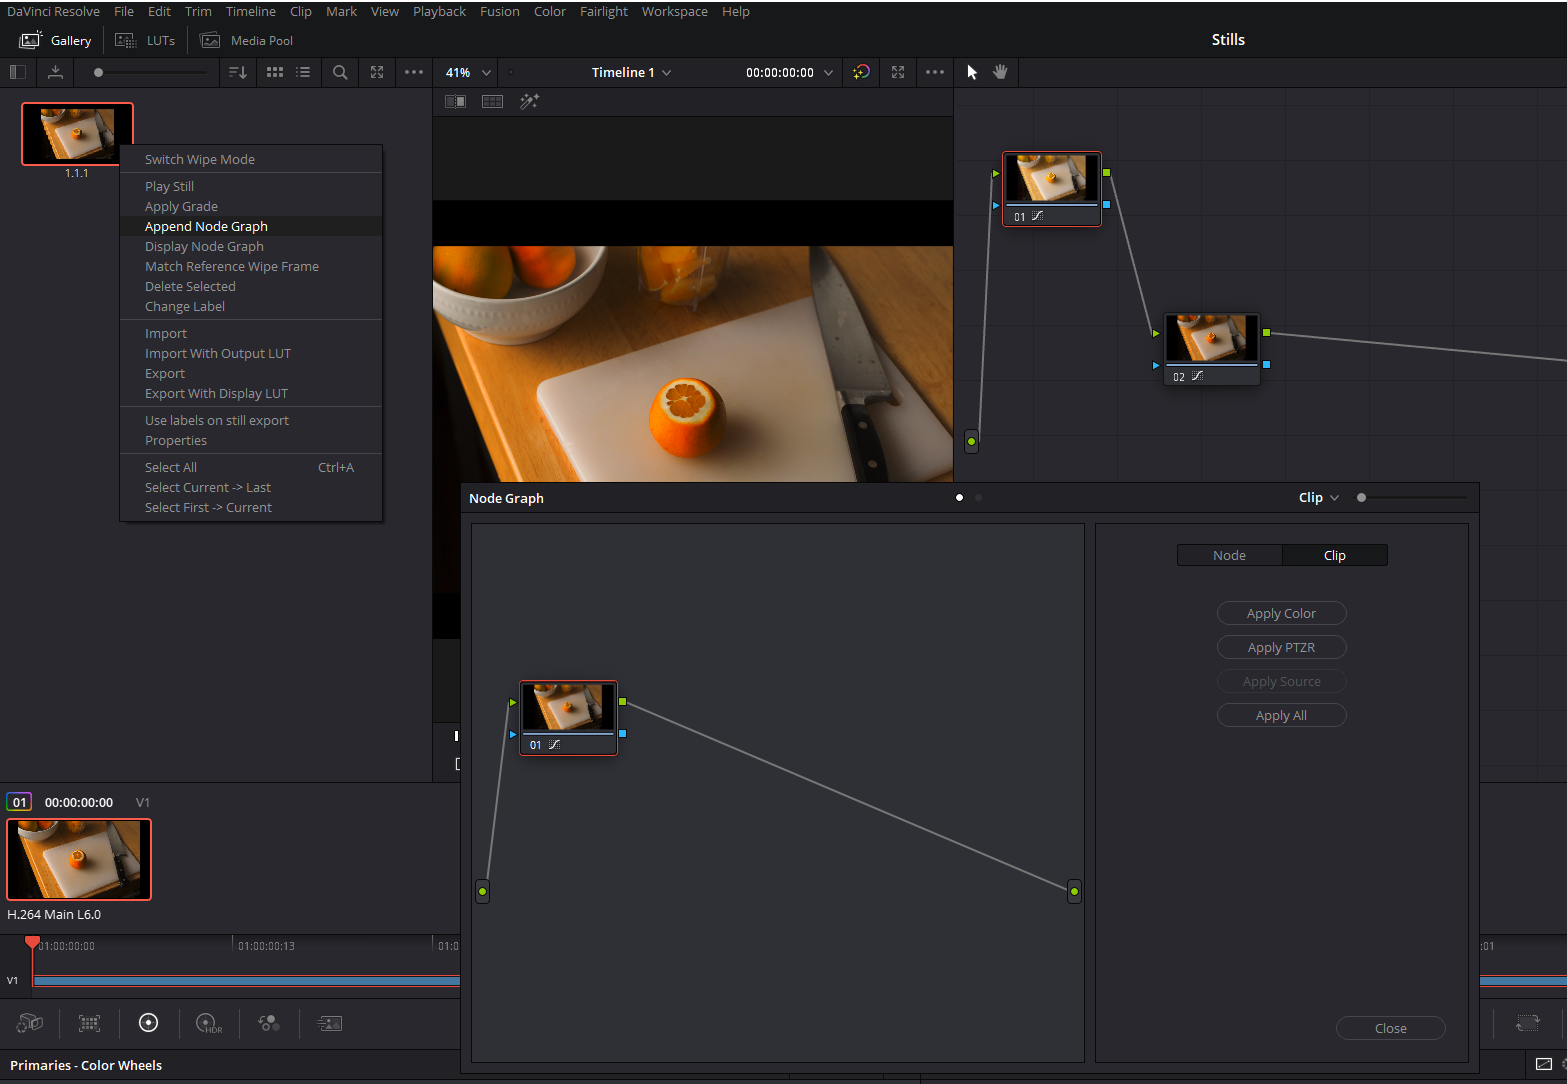 The Append Node Graph option in Resolve, along with the node graphs for both the clip and the still.